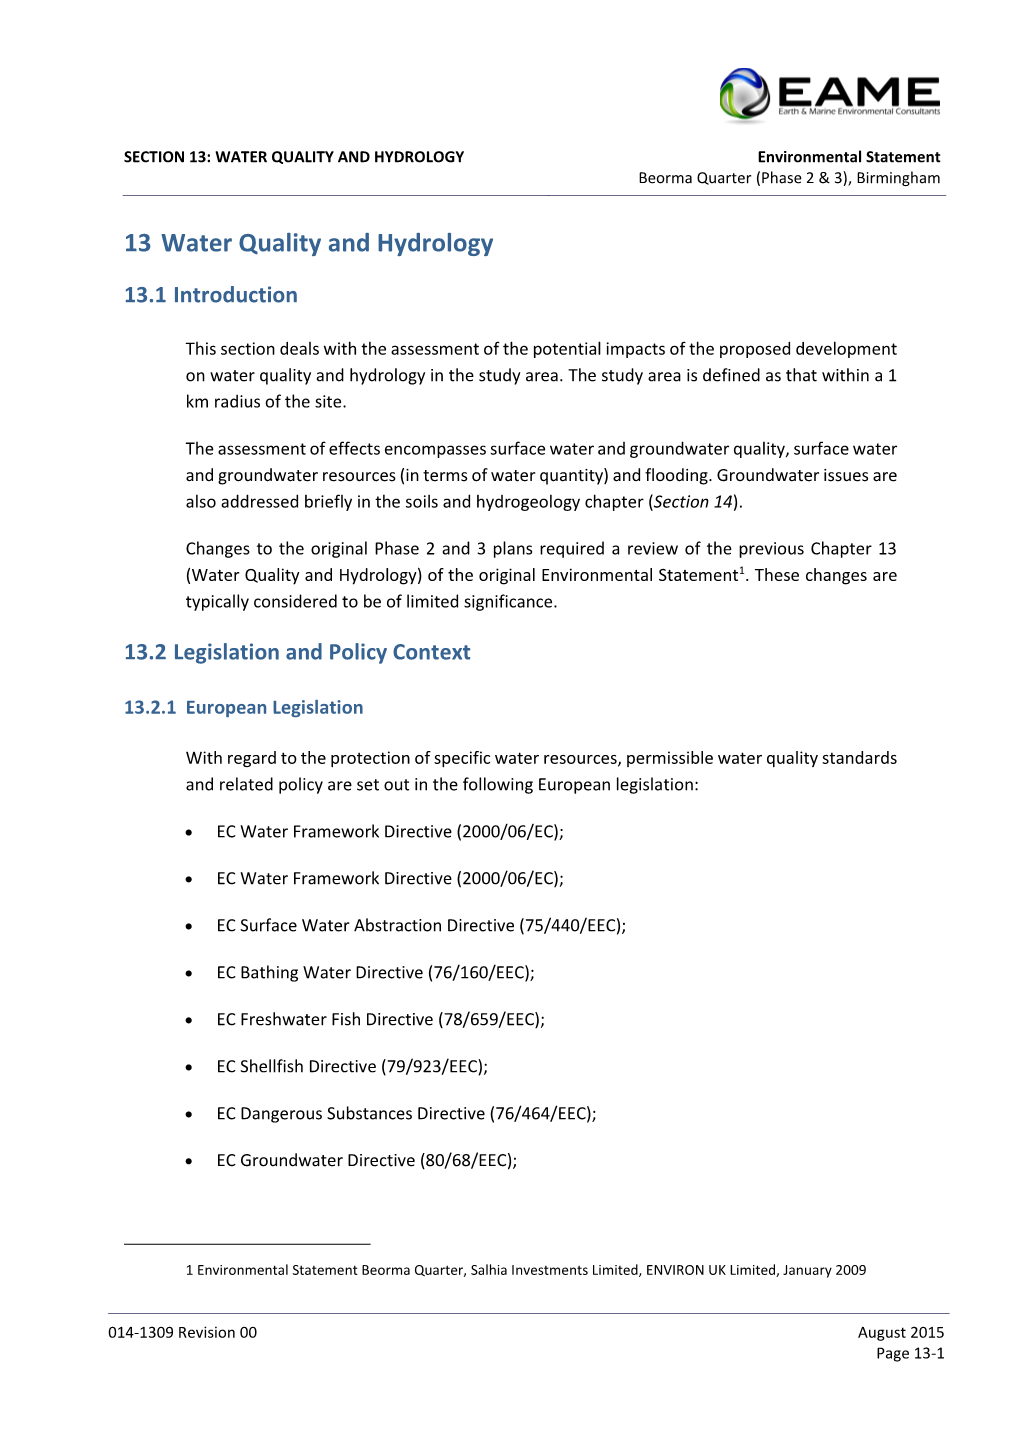 13 Water Quality and Hydrology